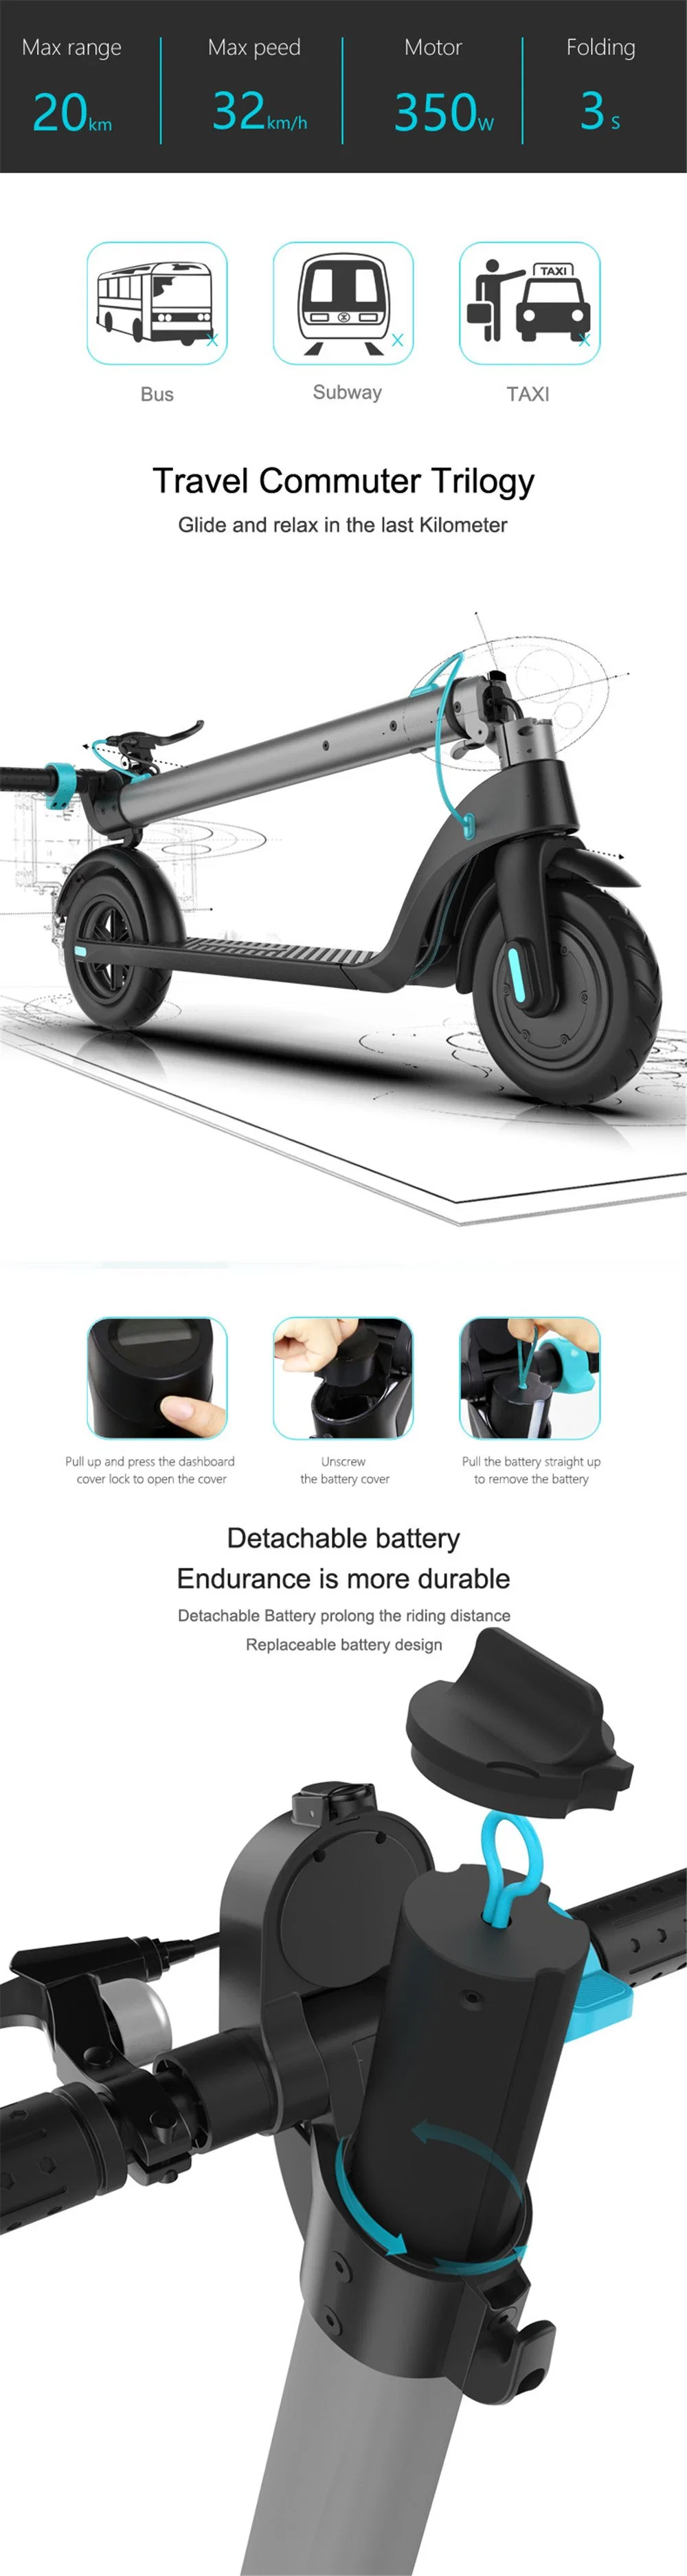 China Wholesale Best Foldable Lithium Battery Bicystar E Scooter 2 Wheels Europe Warehouse 8.5 Inch Cheap Electric Mobility Scooter for Adult